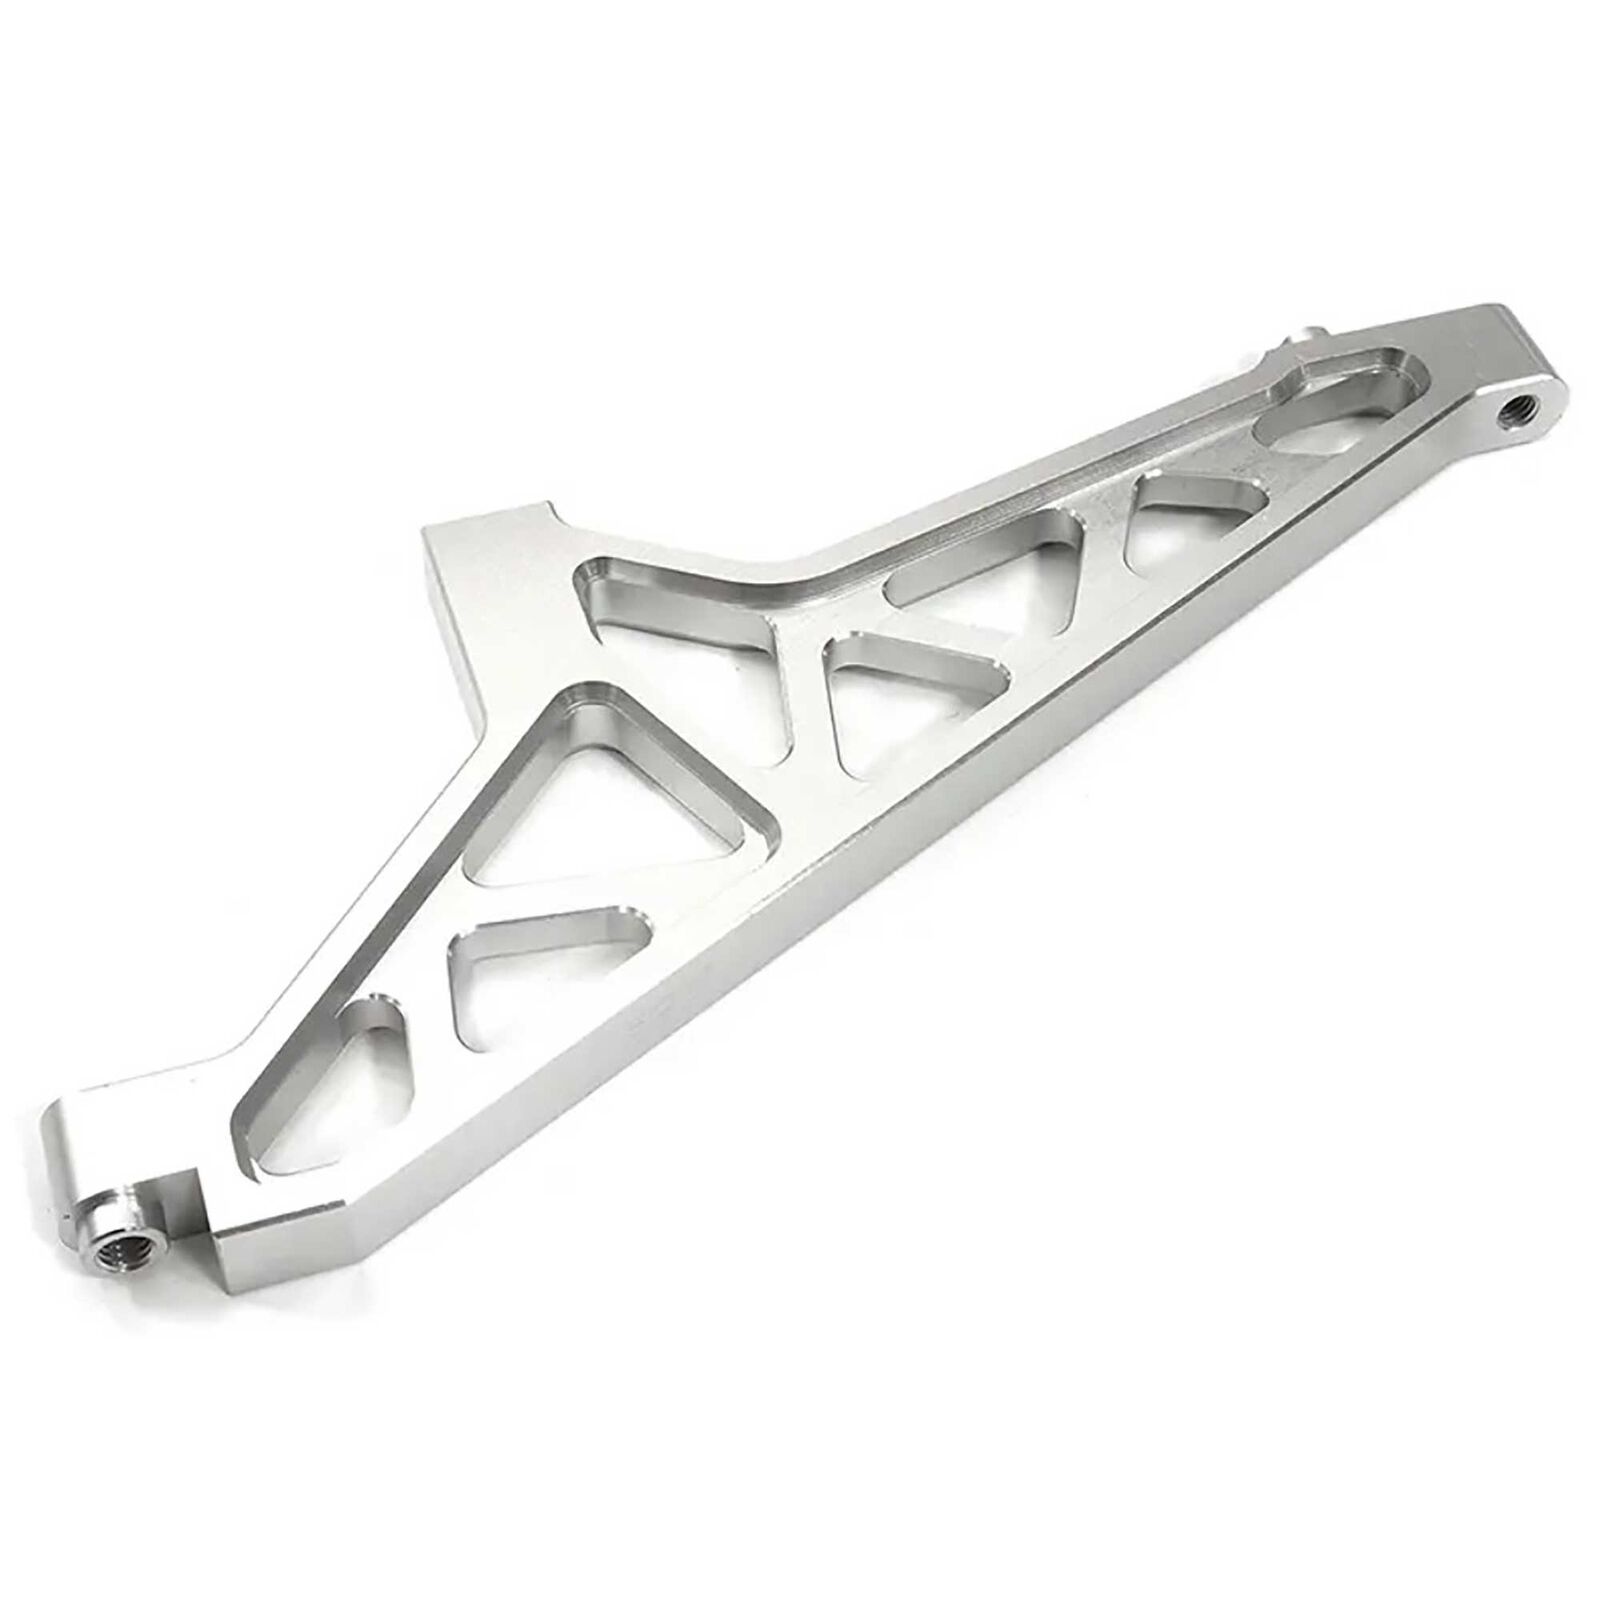 Billet Machined Front Chassis Brace: Losi DBXL-E 2.0